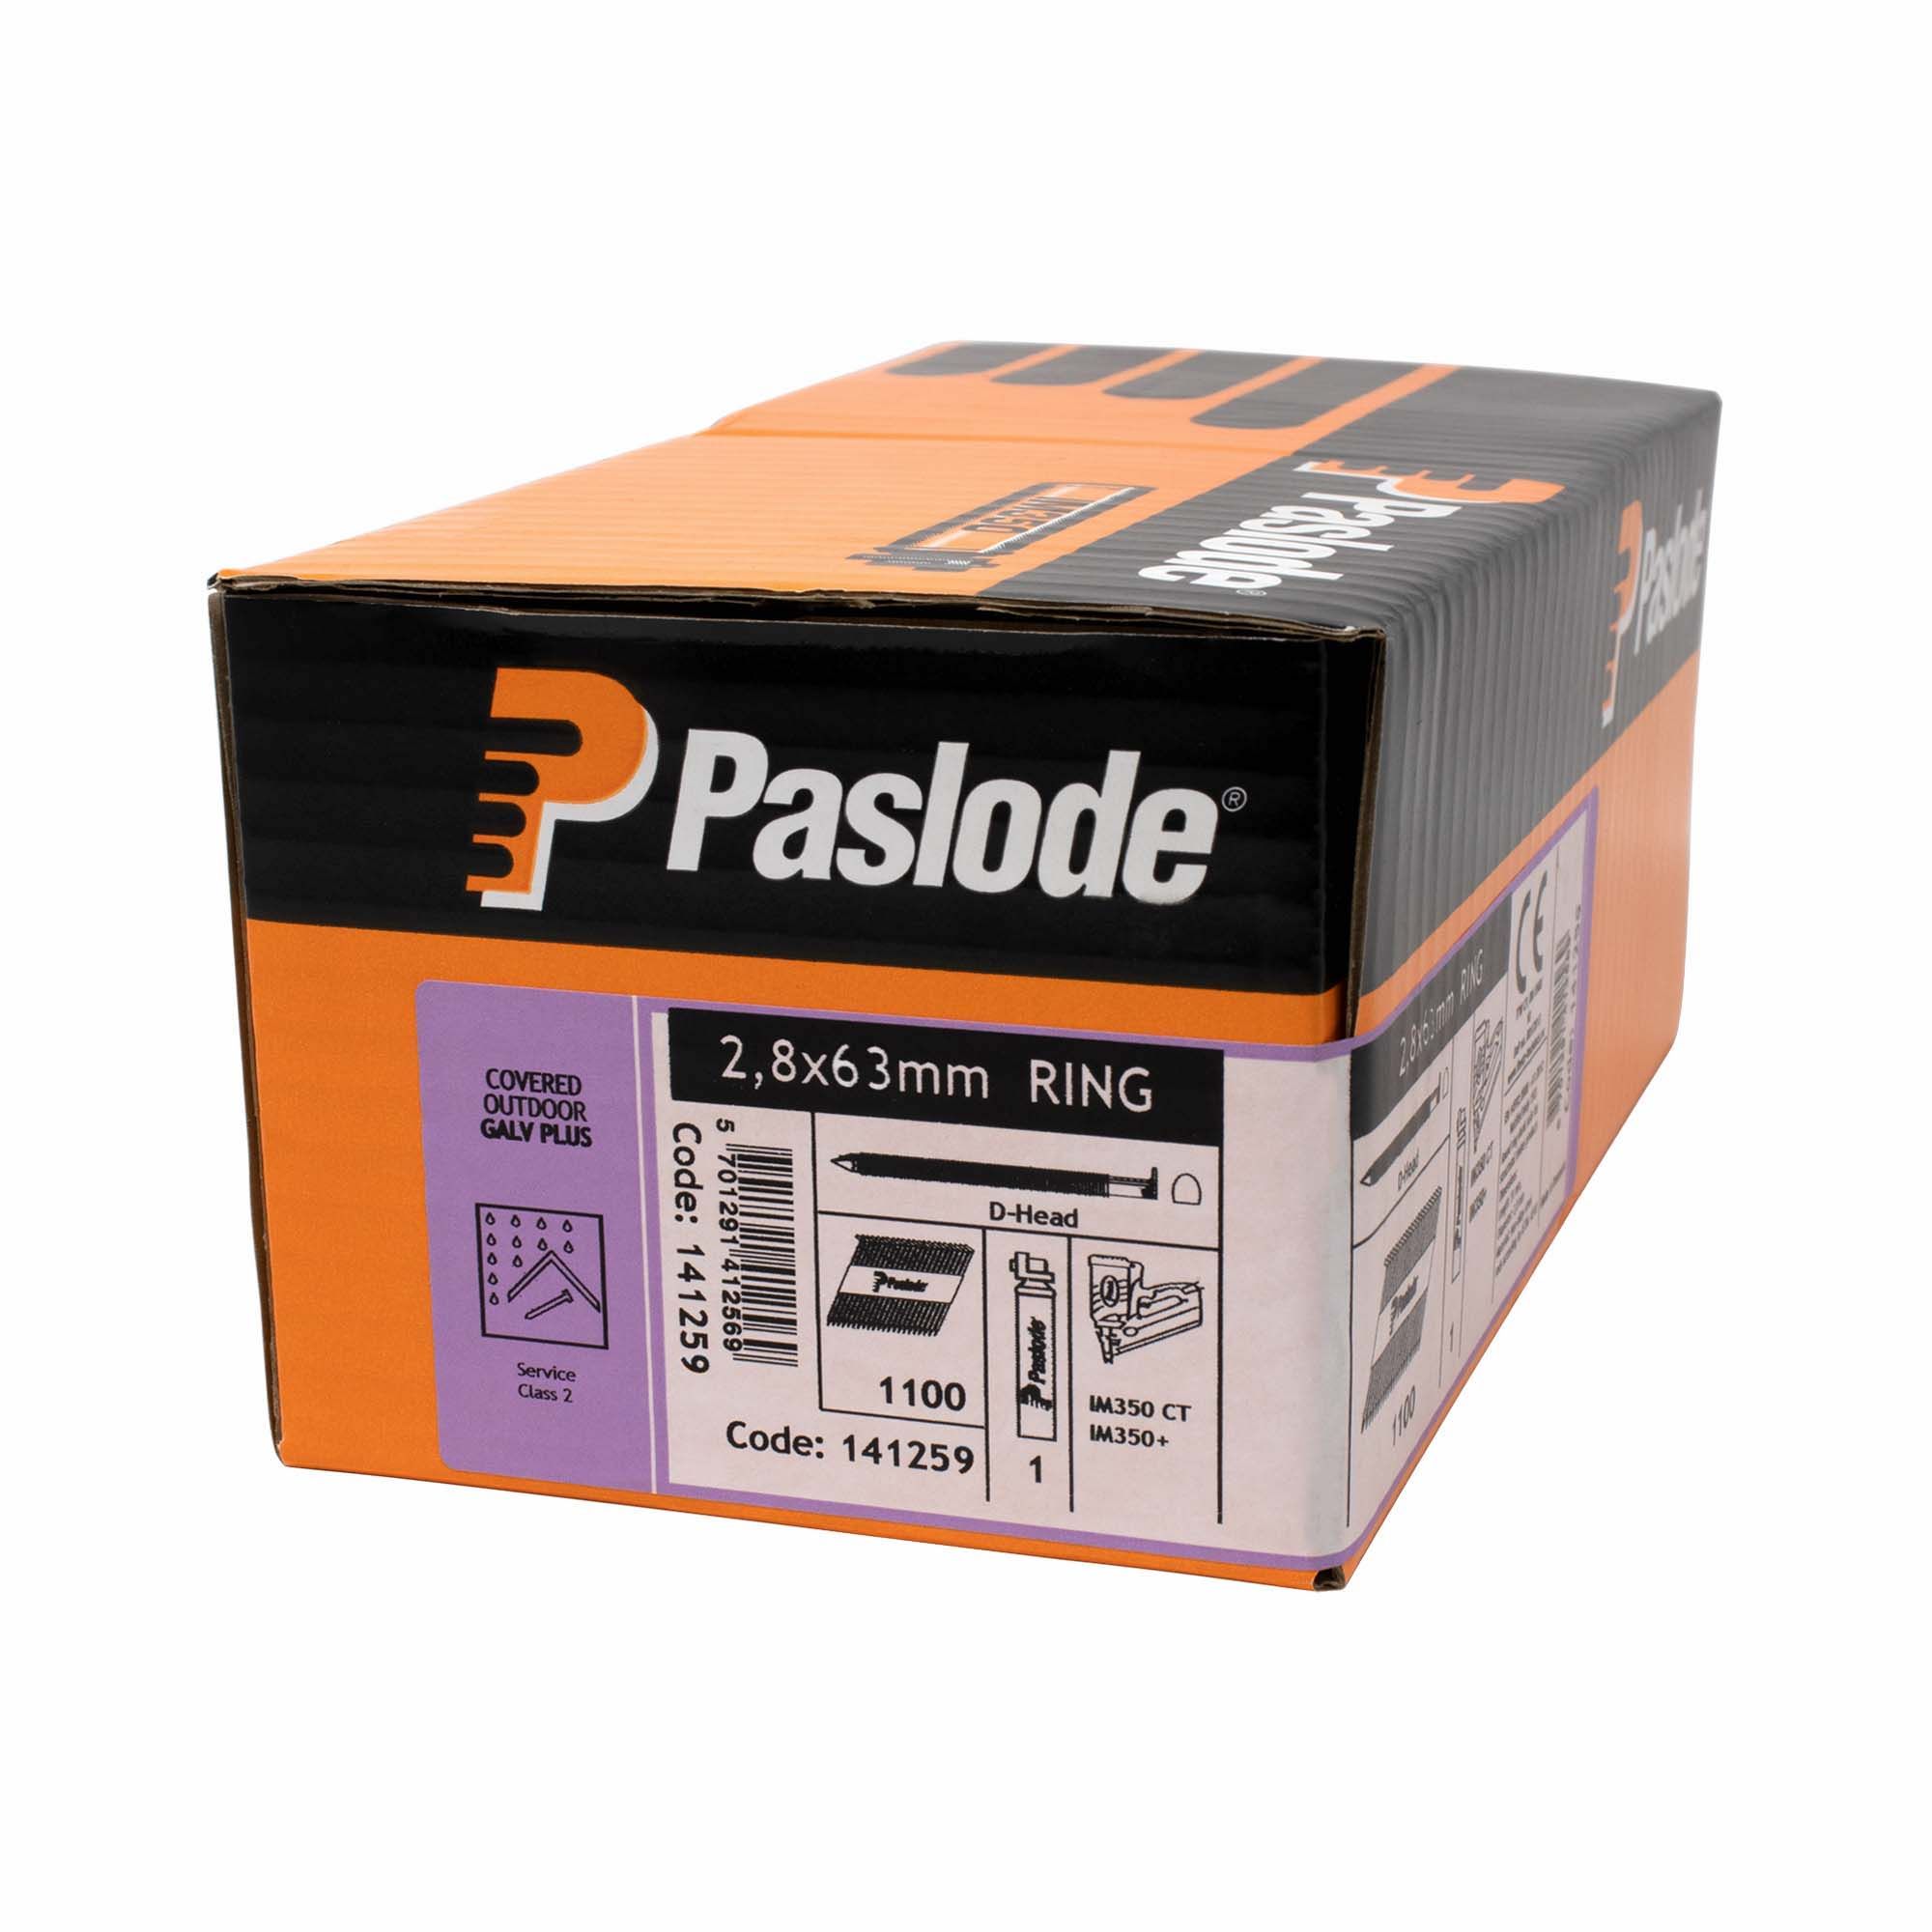 Paslode IM350+ Ring Shank Nail and Fuel Pack Galvanised 2.8mm x 63mm - 141259